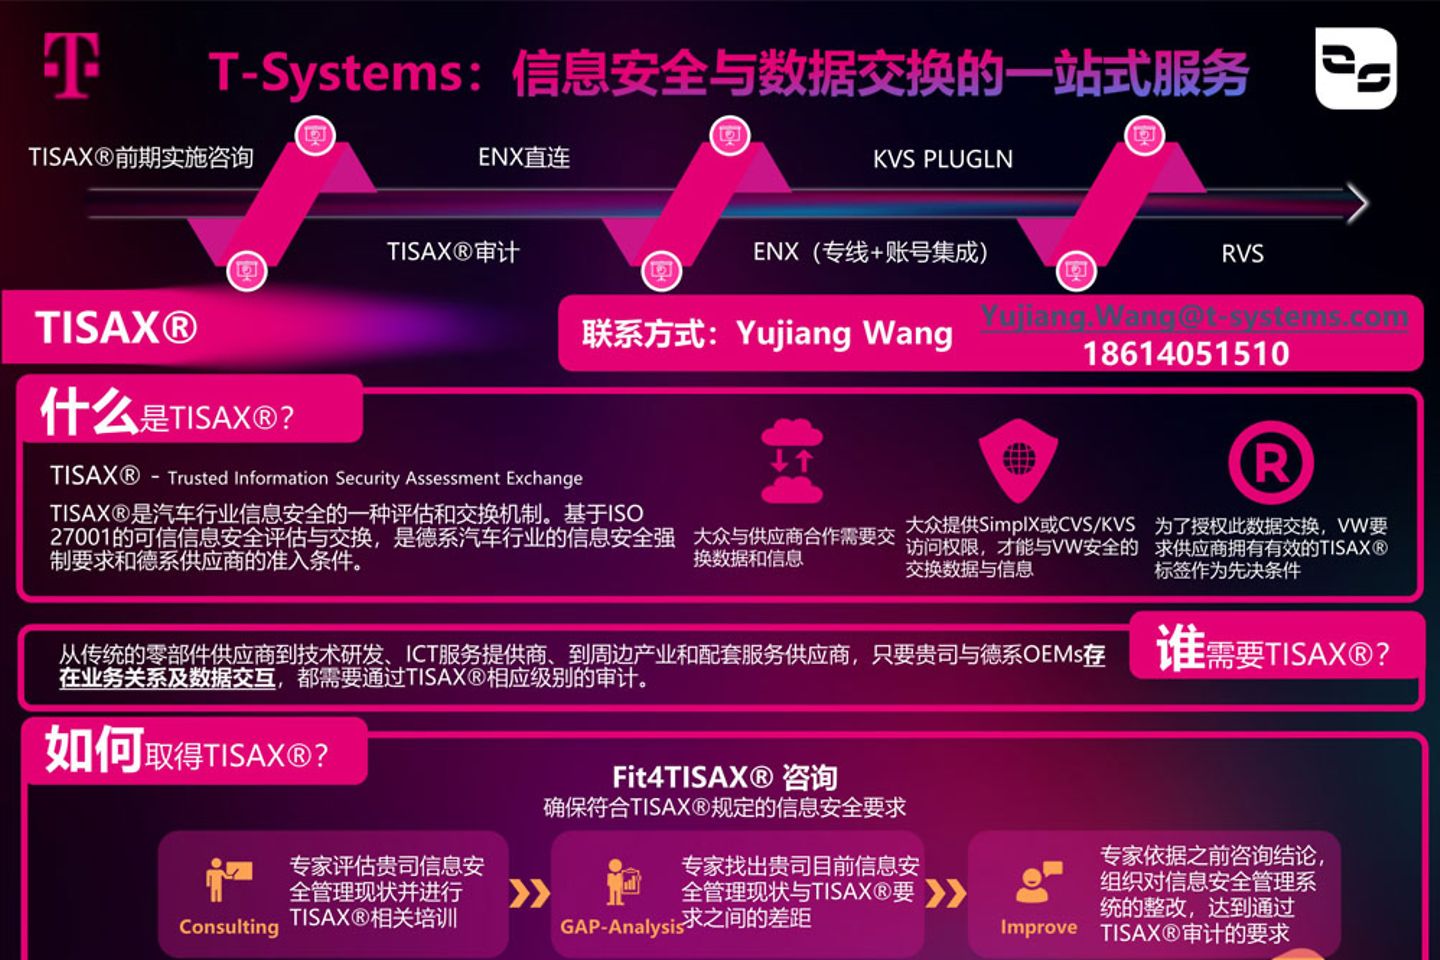 Flyer showing the TISAX service by T-Systems China